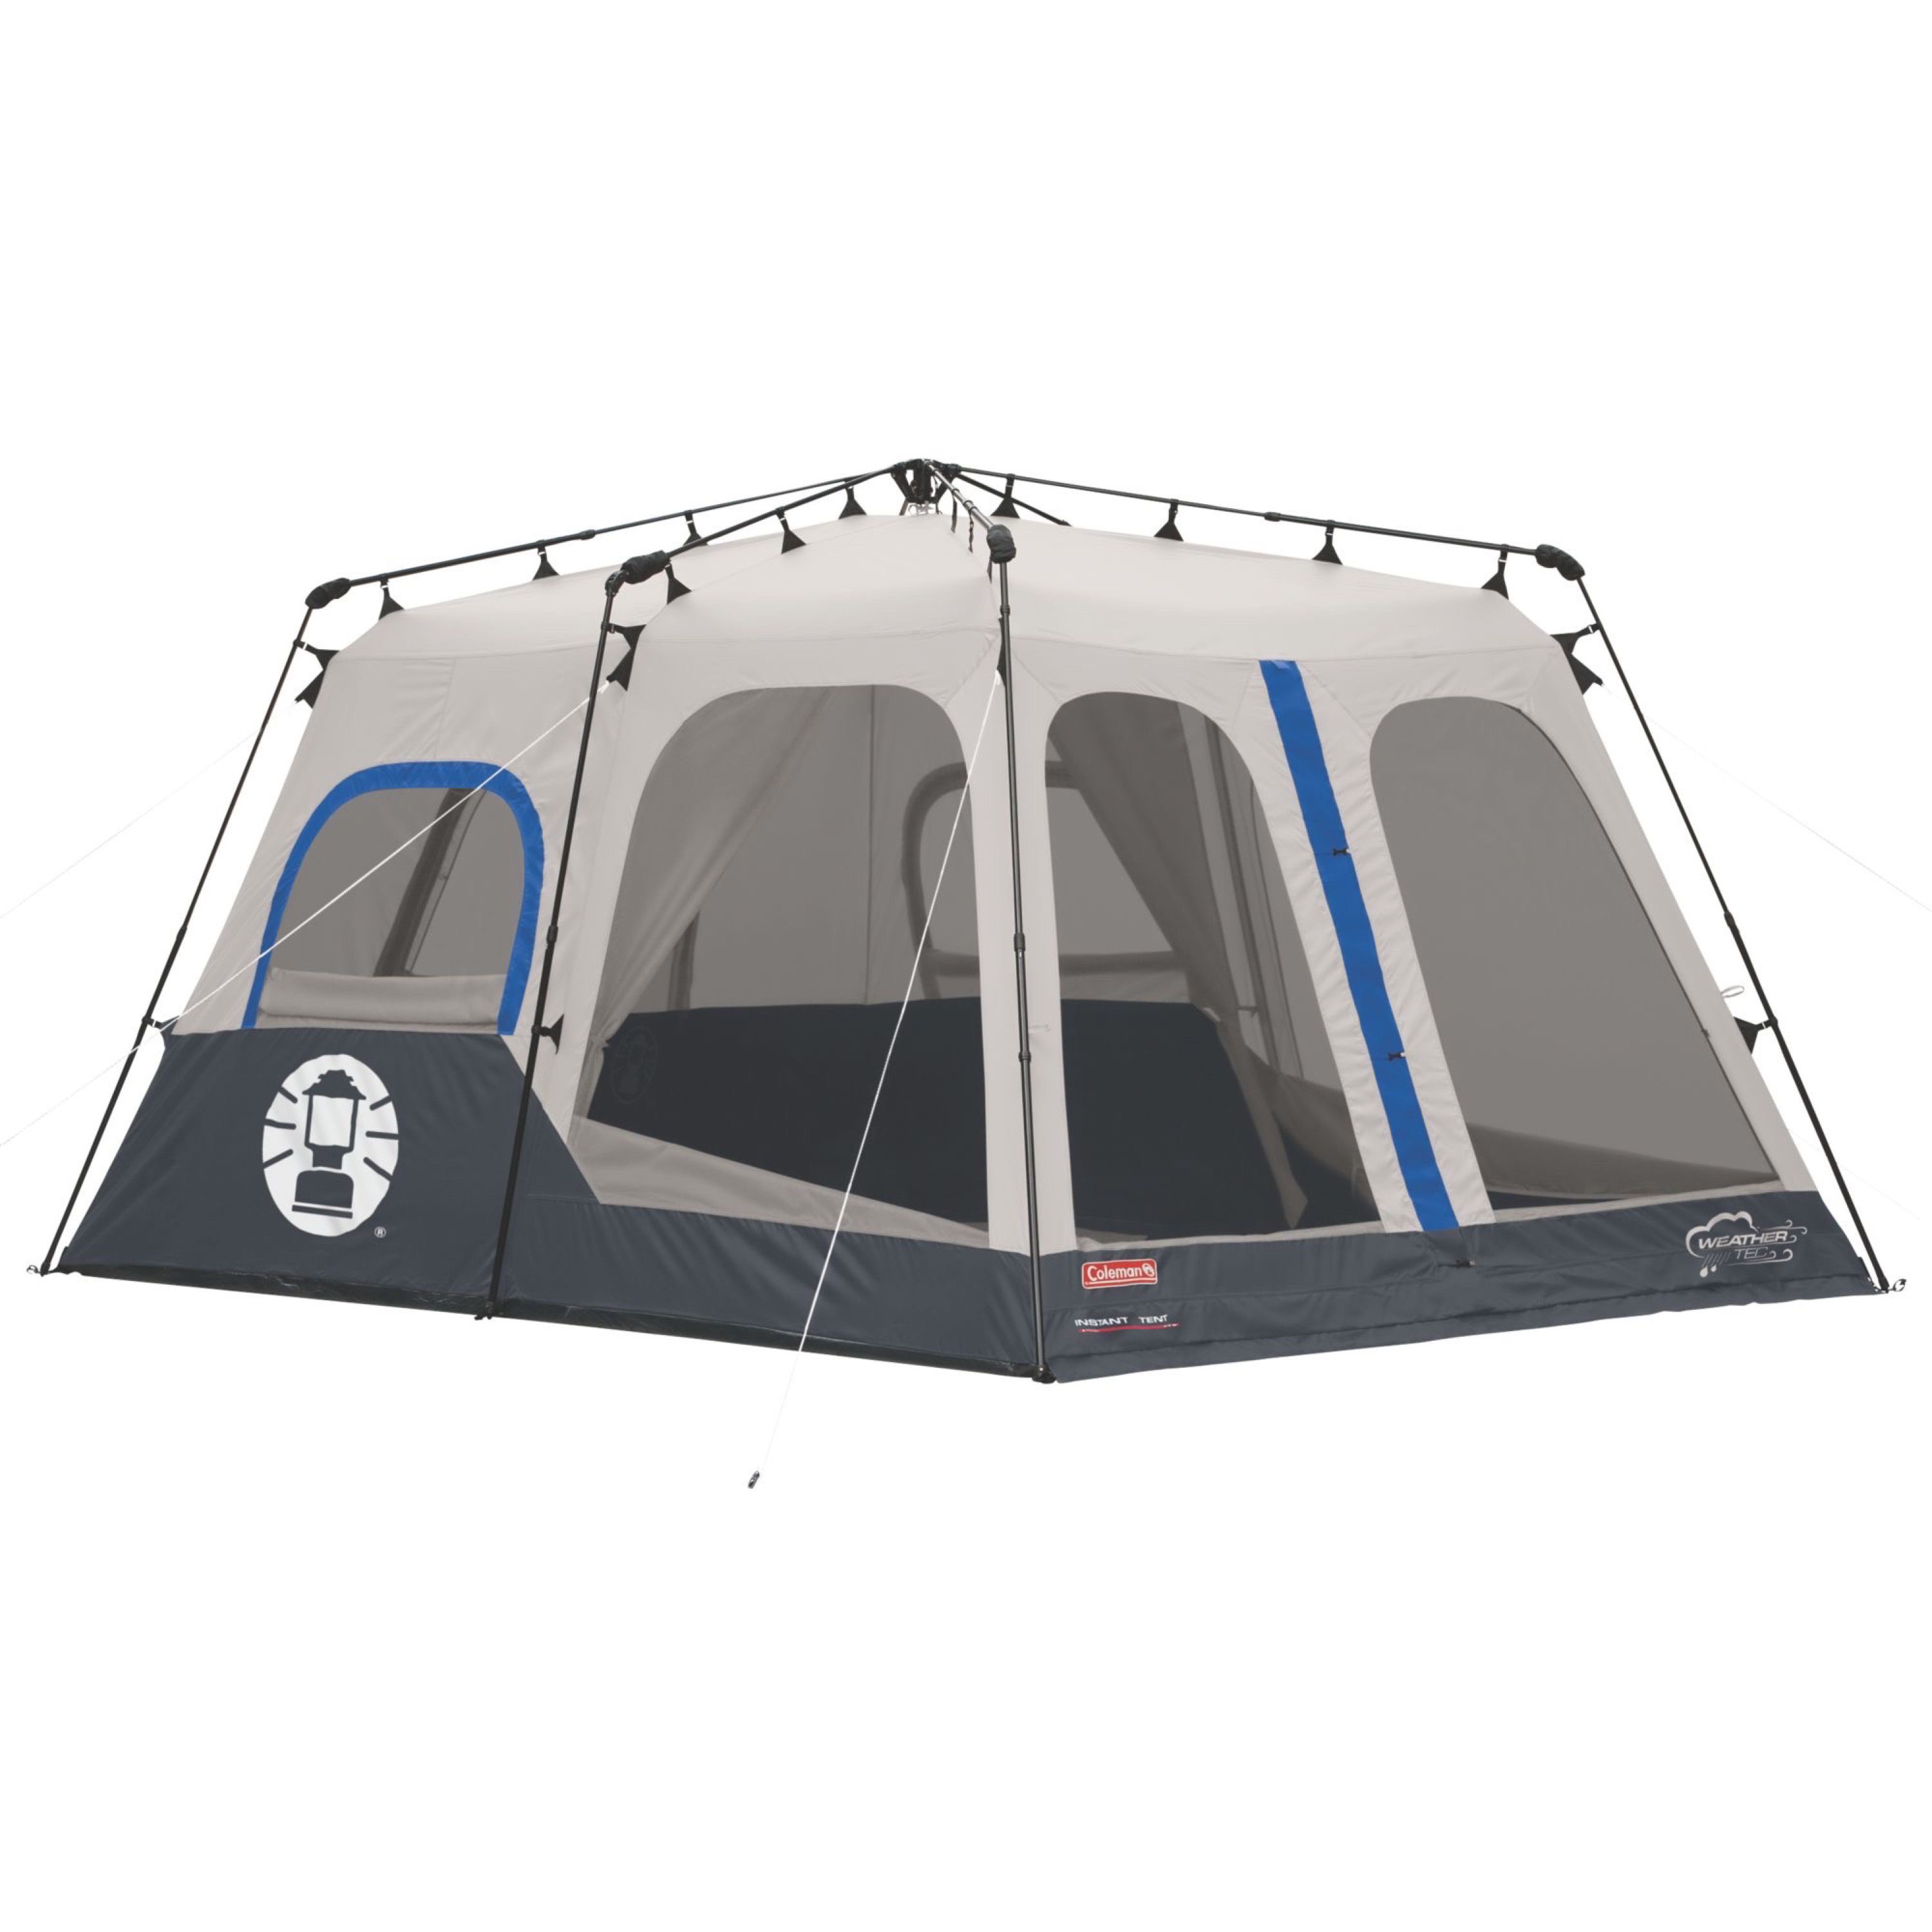 Coleman 8-Person Instant Tent - image 2 of 14